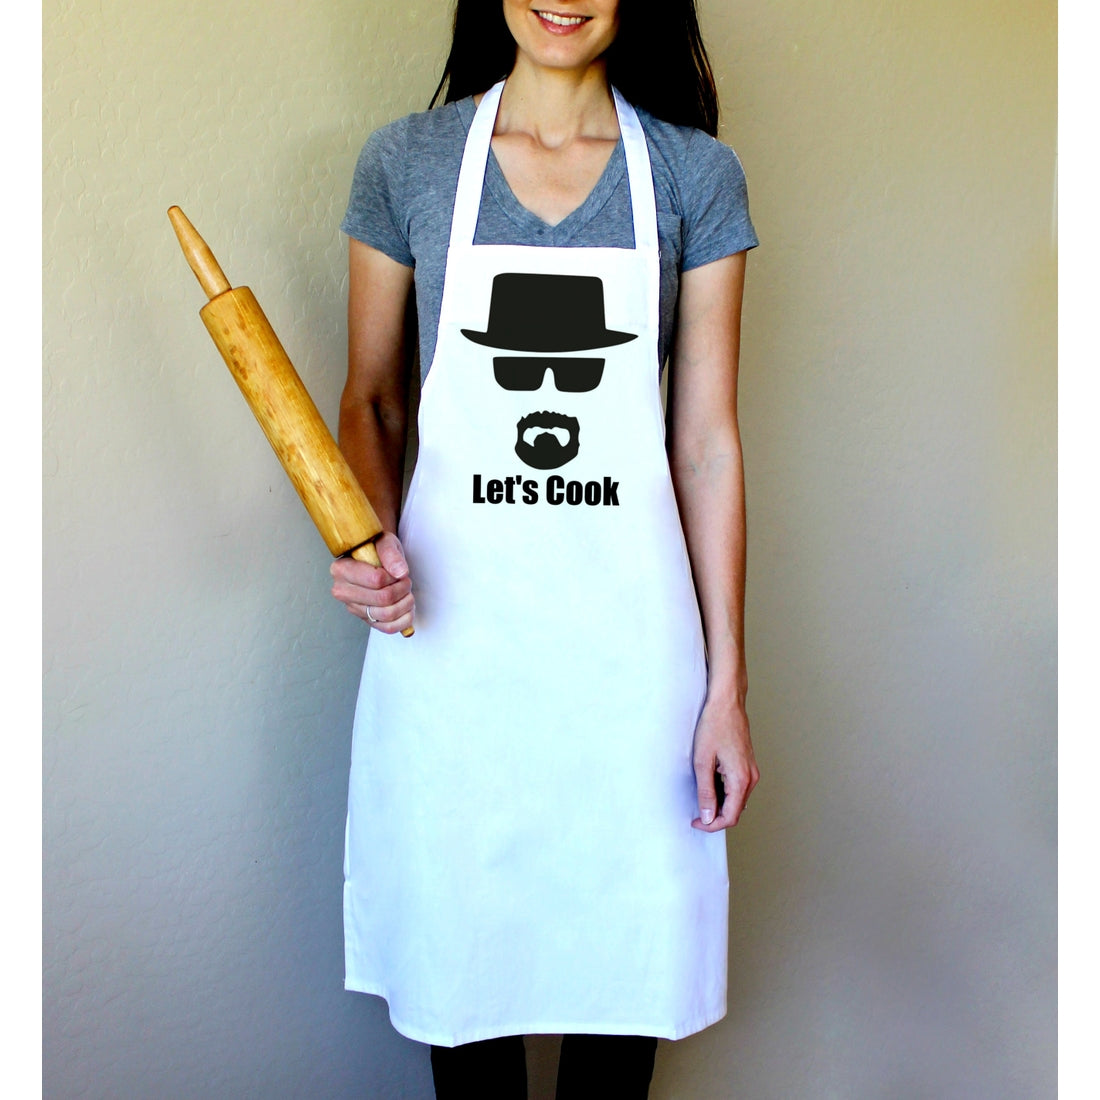 Let's Cook "Walter" Apron